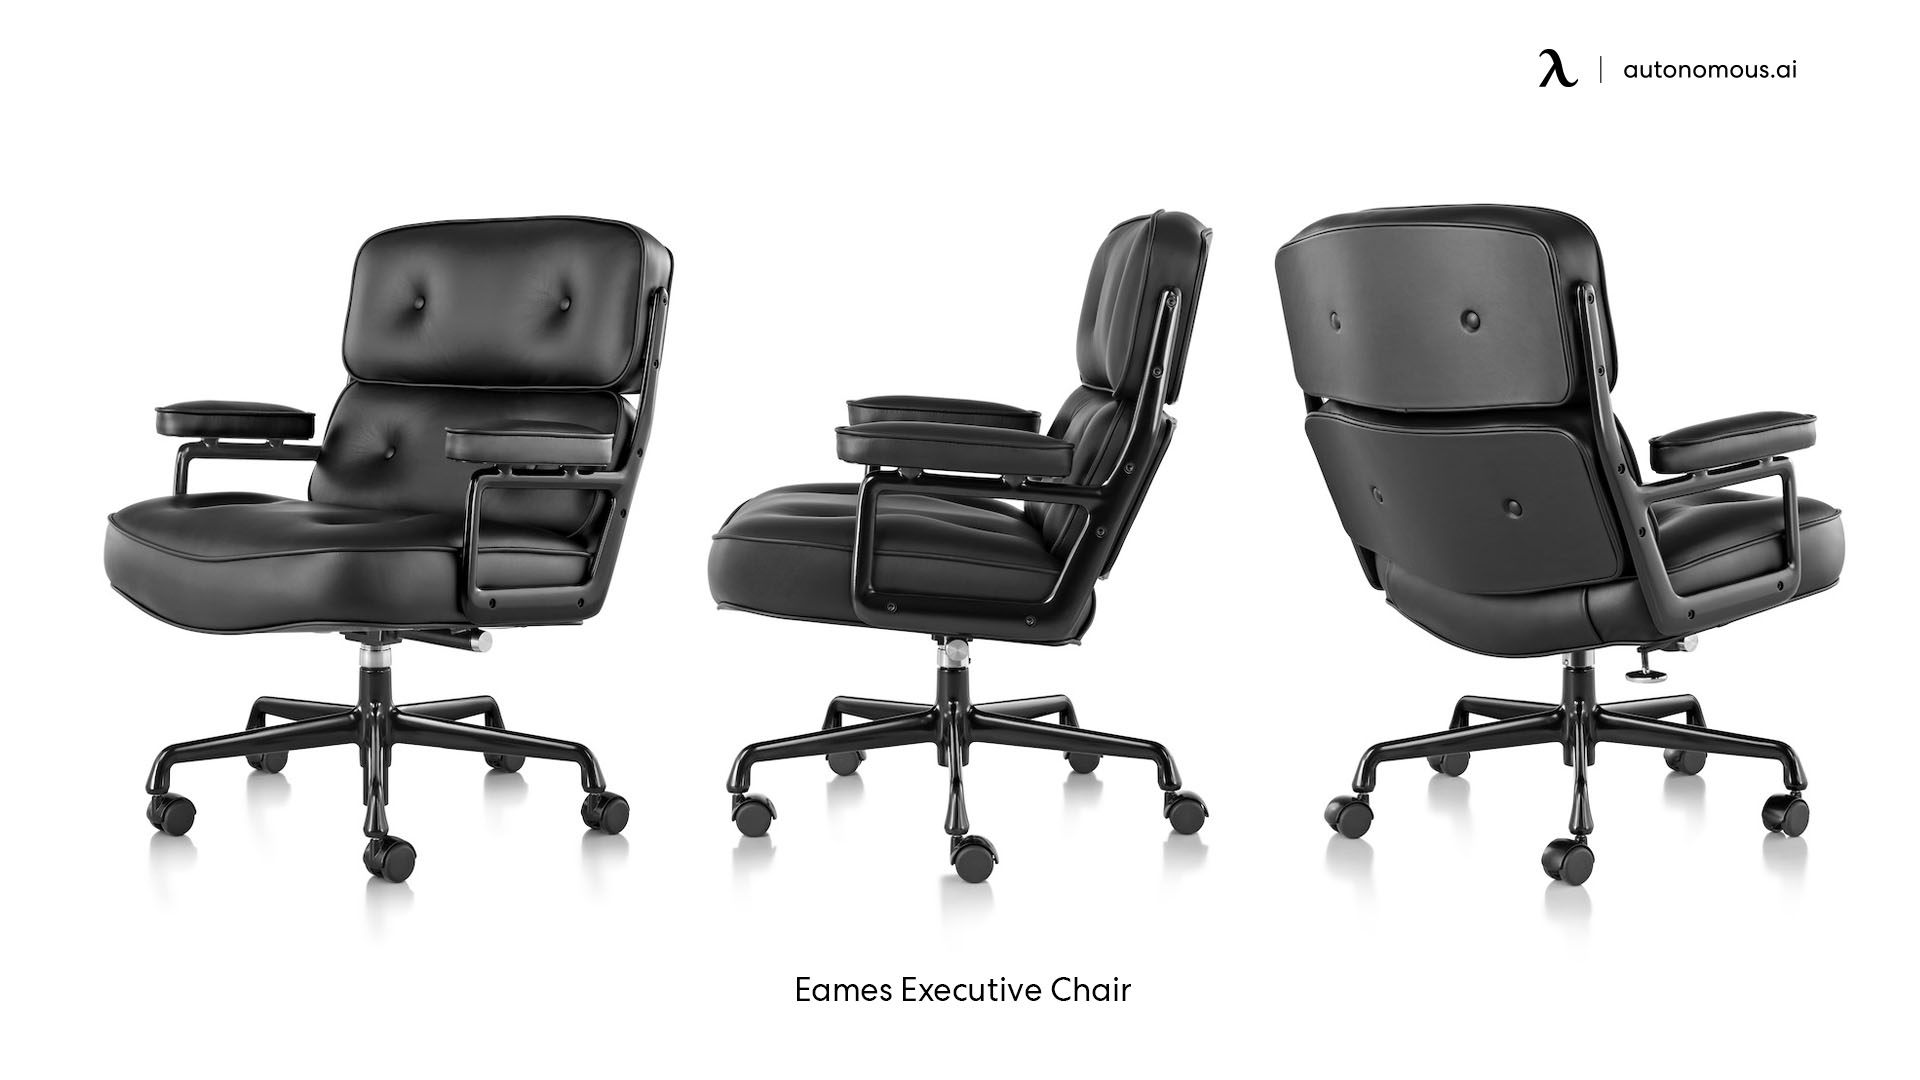 Eames stylish home office chair